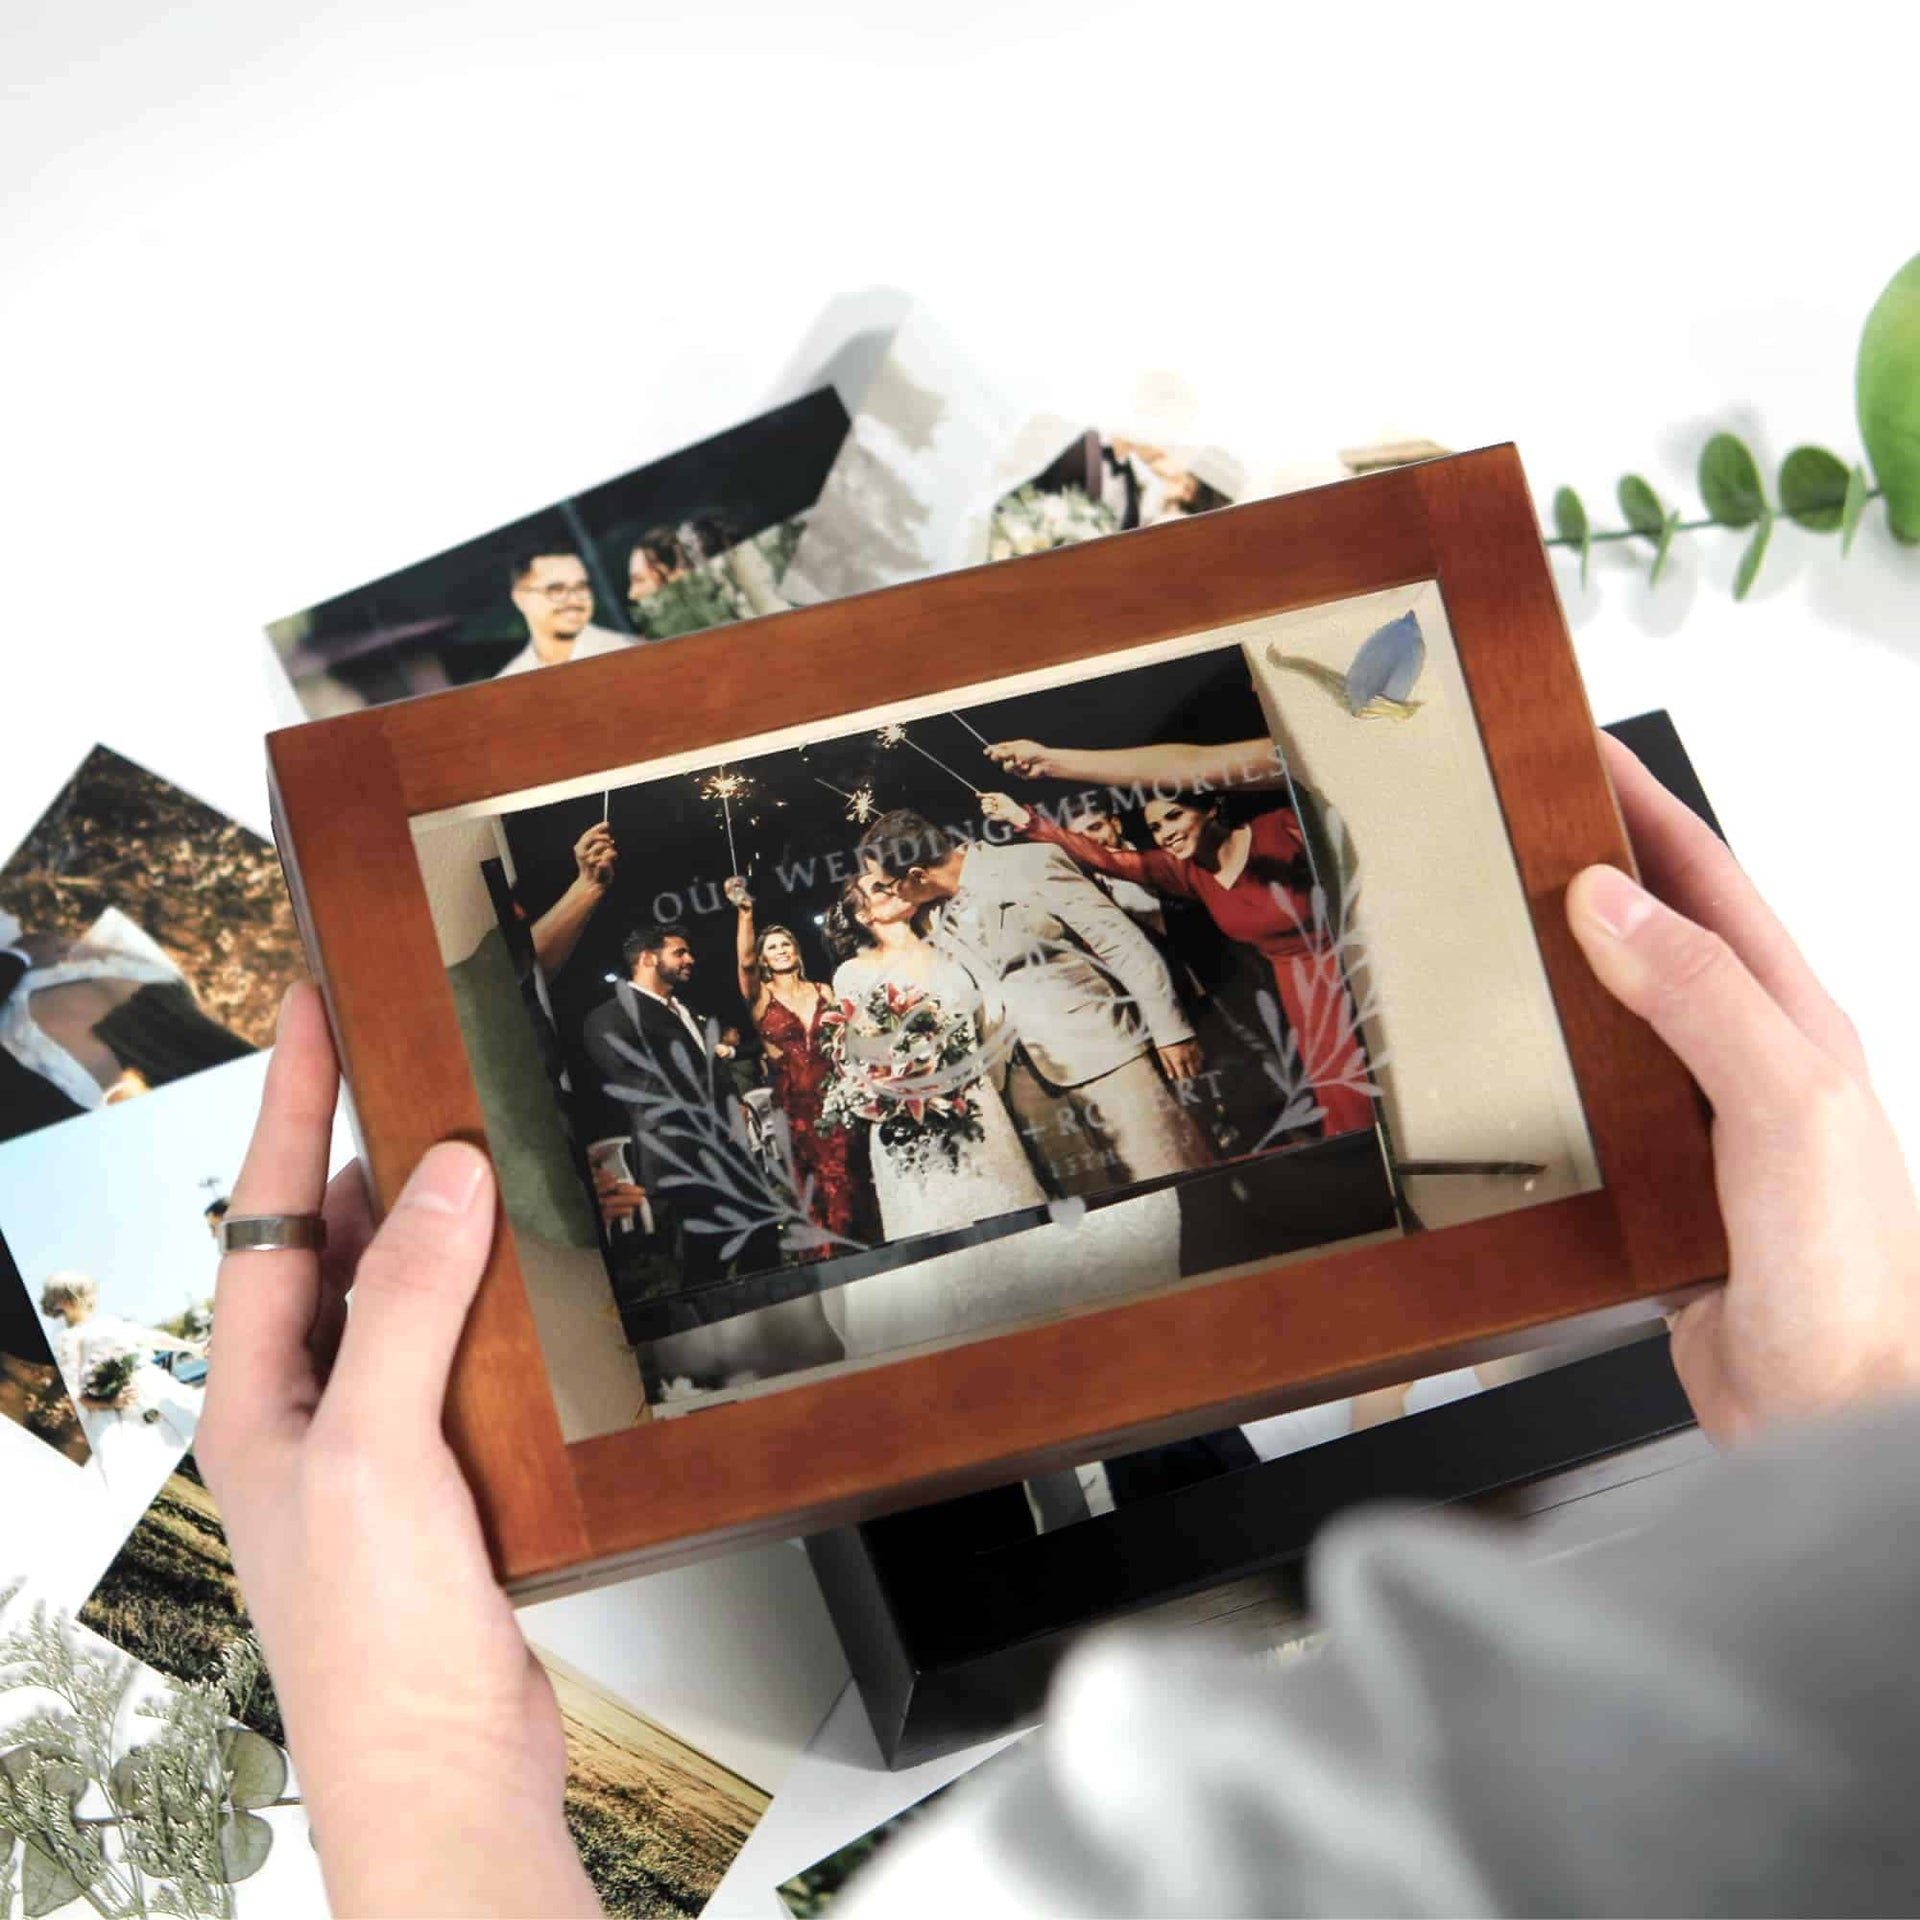 photo storage box with engraved cover holding wedding photographs